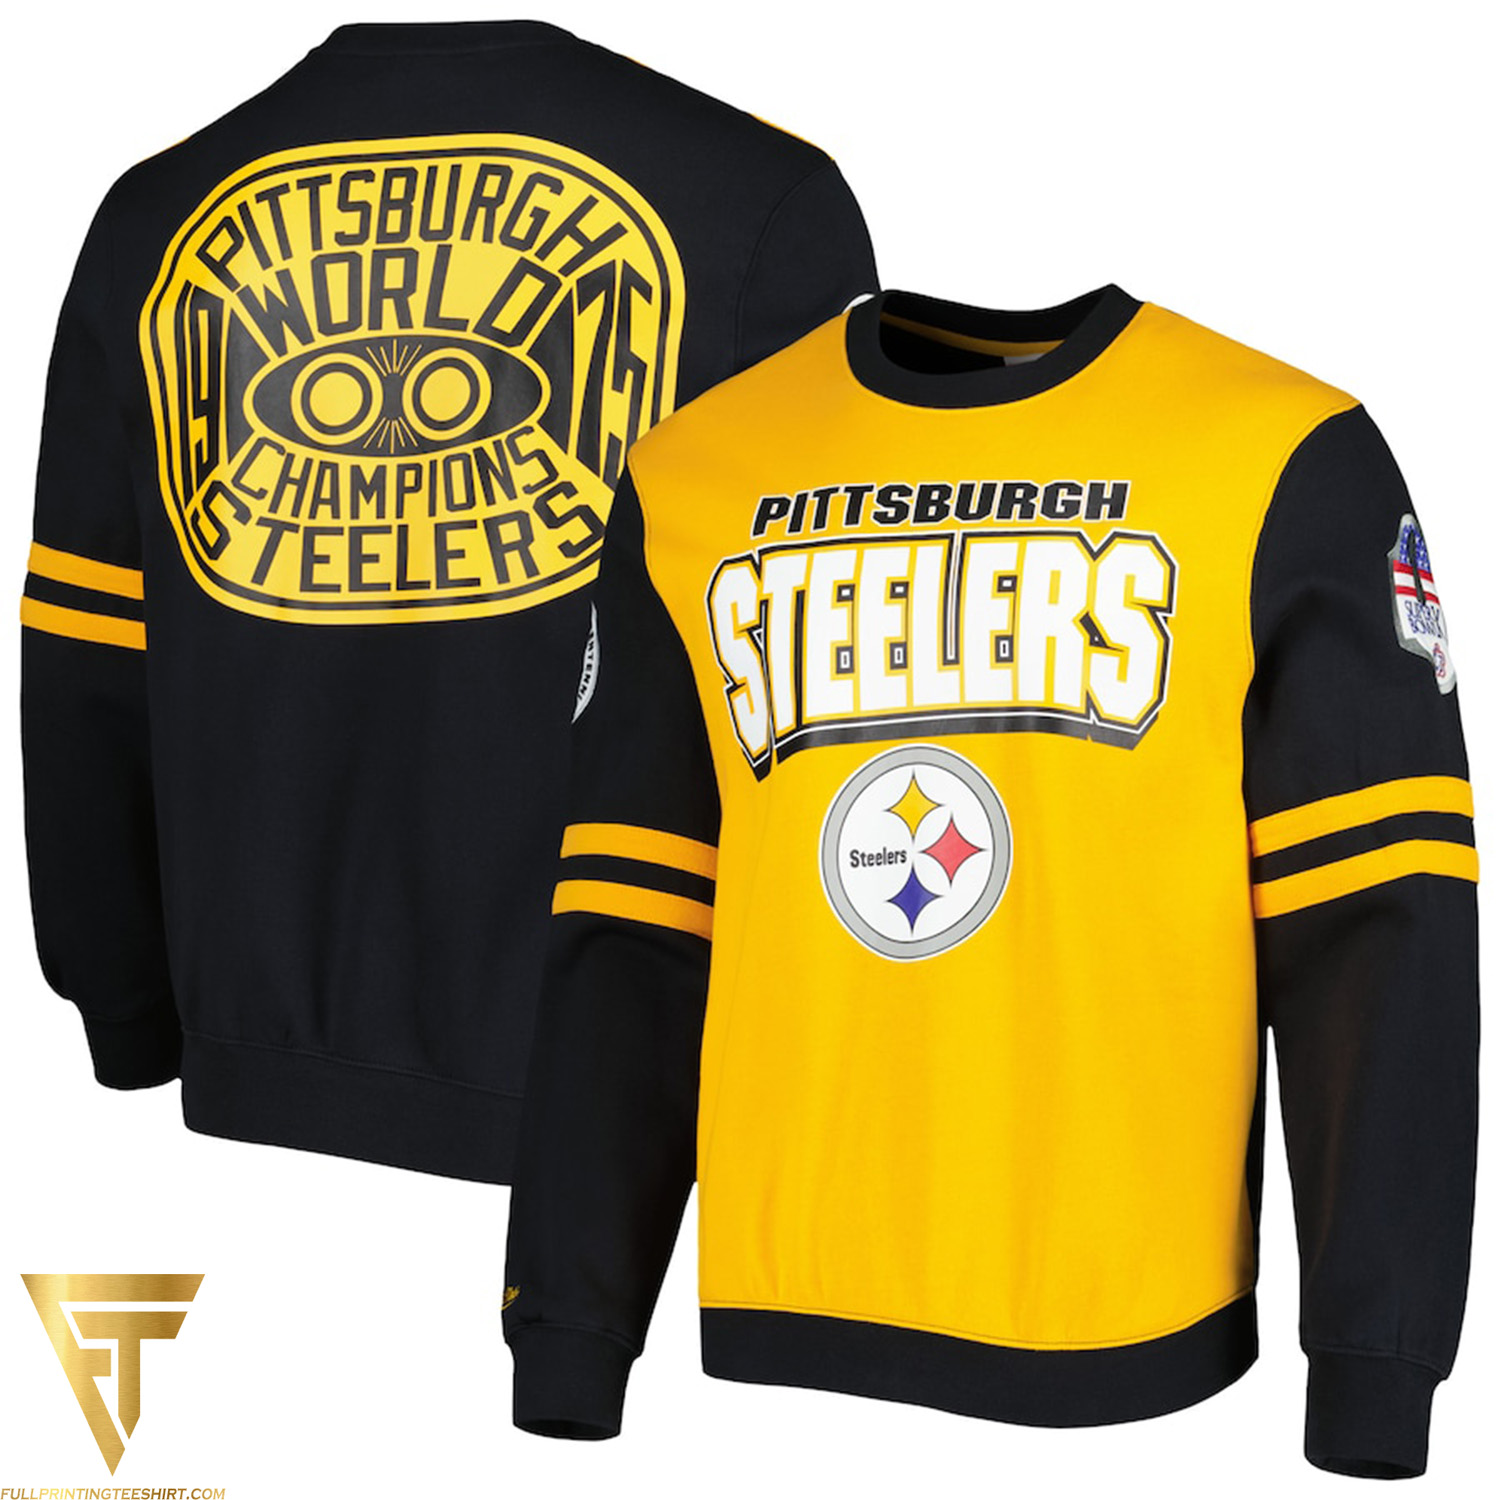 Black and Gold Resurgence The Pittsburgh Steelers' Thrilling Journey this Season and the Iconic Pittsburgh Steelers Sweatshirt